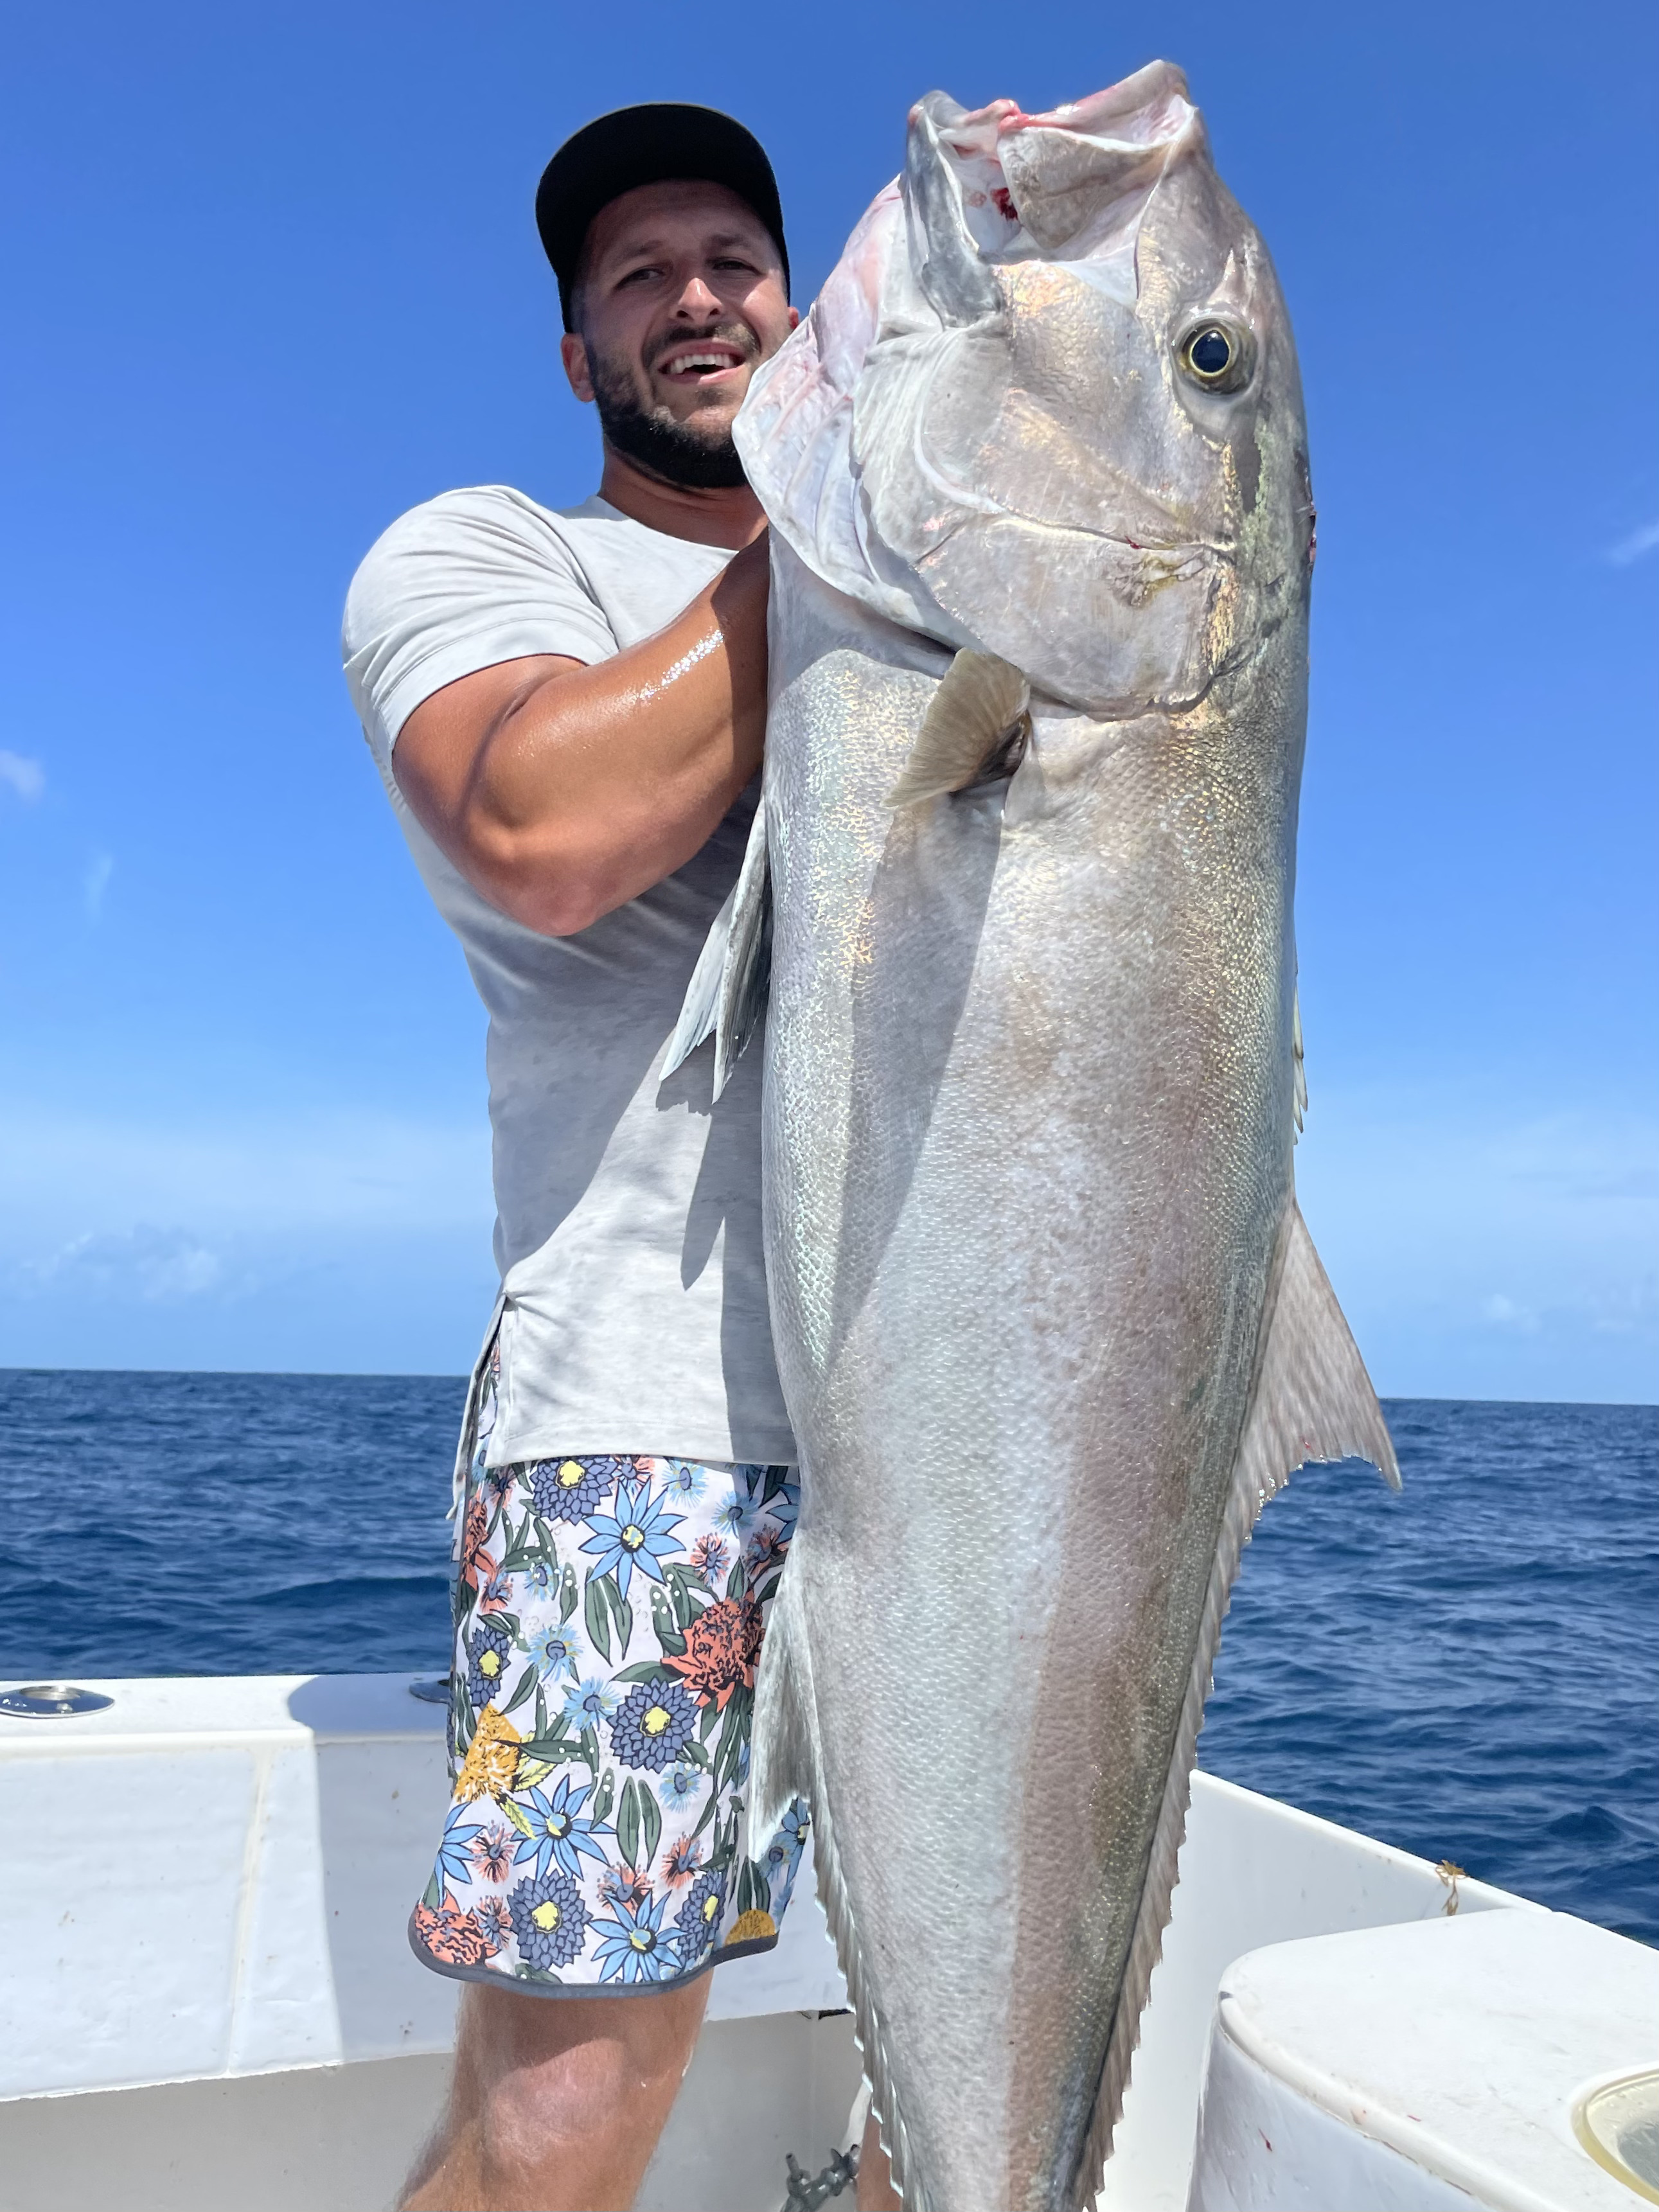 A man holds up a massive amberjack fish caught during a fishing charter, showcasing the impressive size of the catch and the excitement of deep-sea fishing.